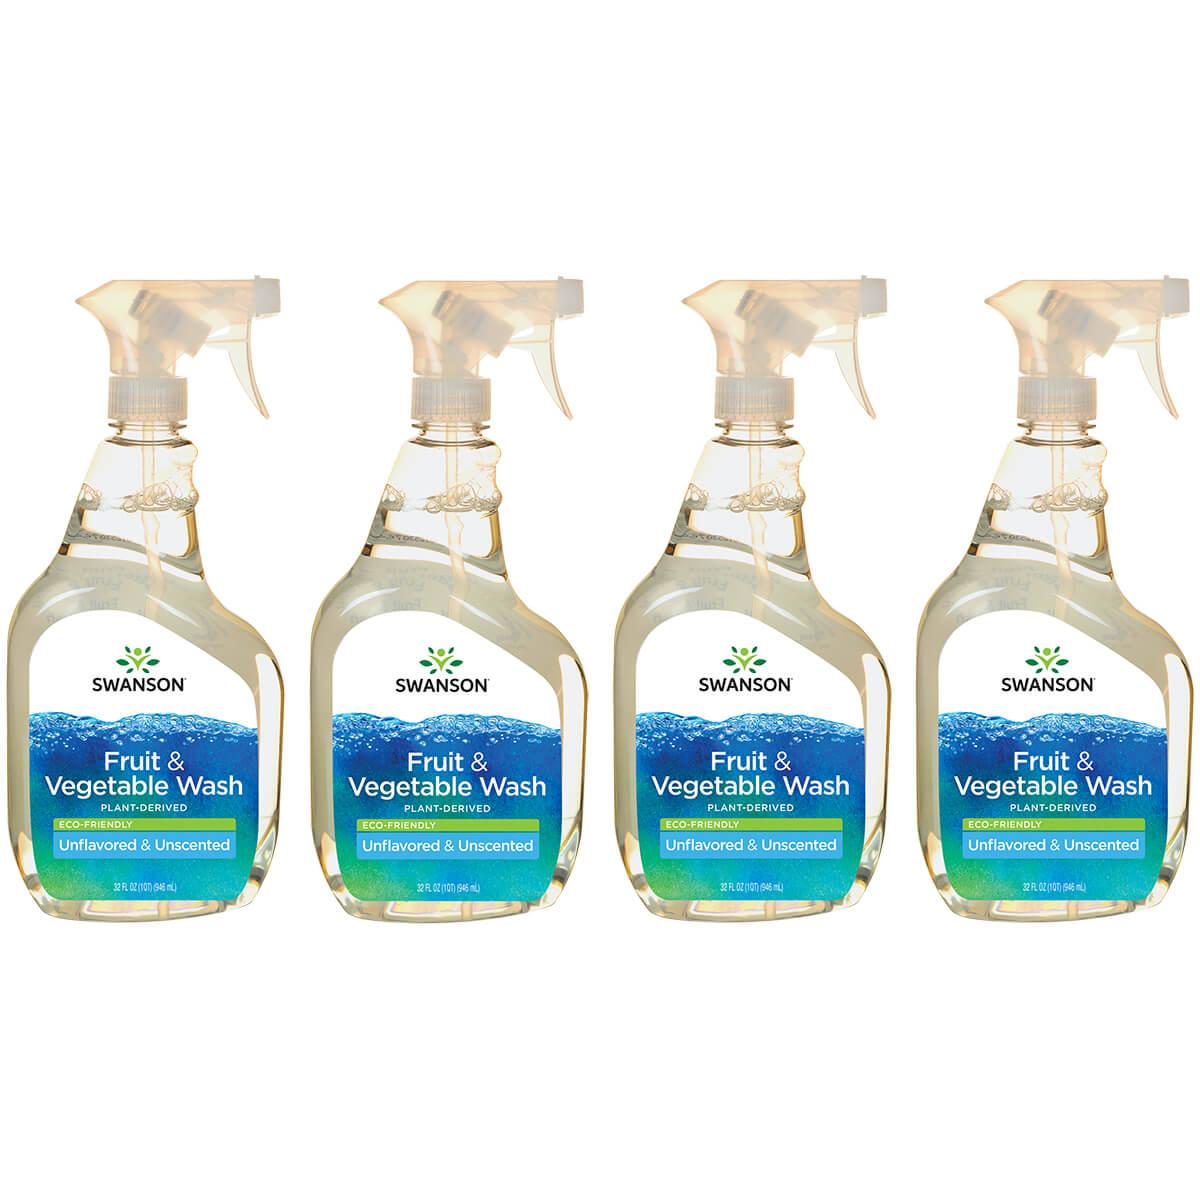 Swanson Healthy Home Fruit & Vegetable Wash - Eco-Friendly Unflavored Unscented 4 Pack 32 fl oz Liquid